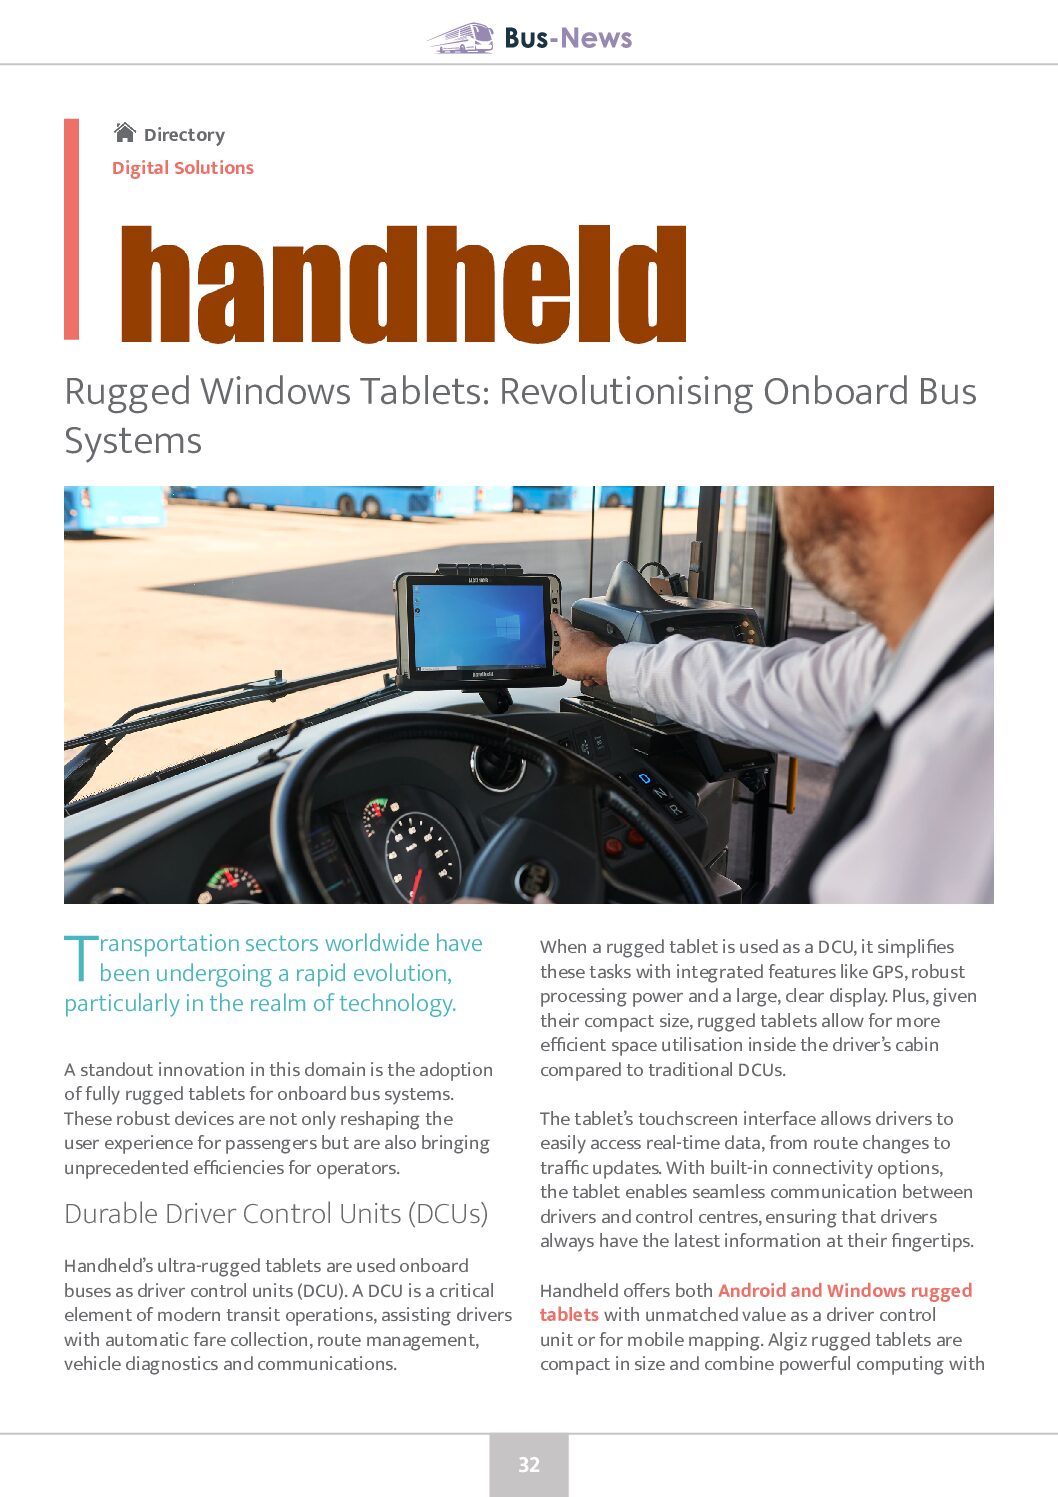 Rugged Windows Tablets: Revolutionising Onboard Bus Systems